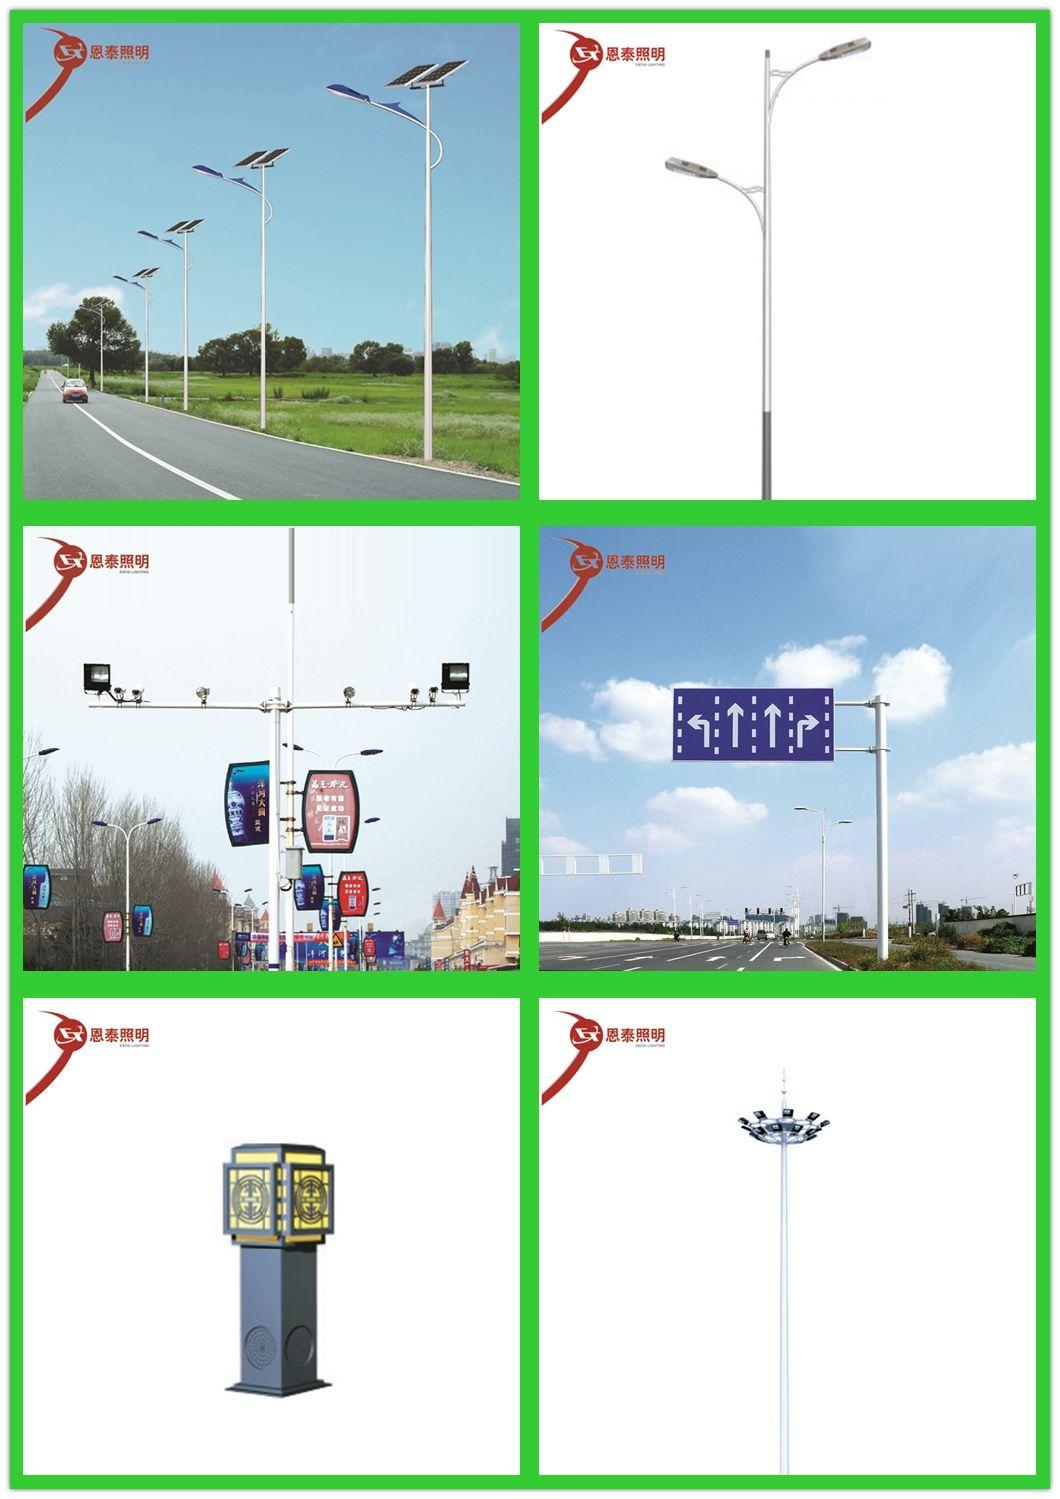 Integrated 30W 60W 90W Rotation Certified Solar All in One Street Light